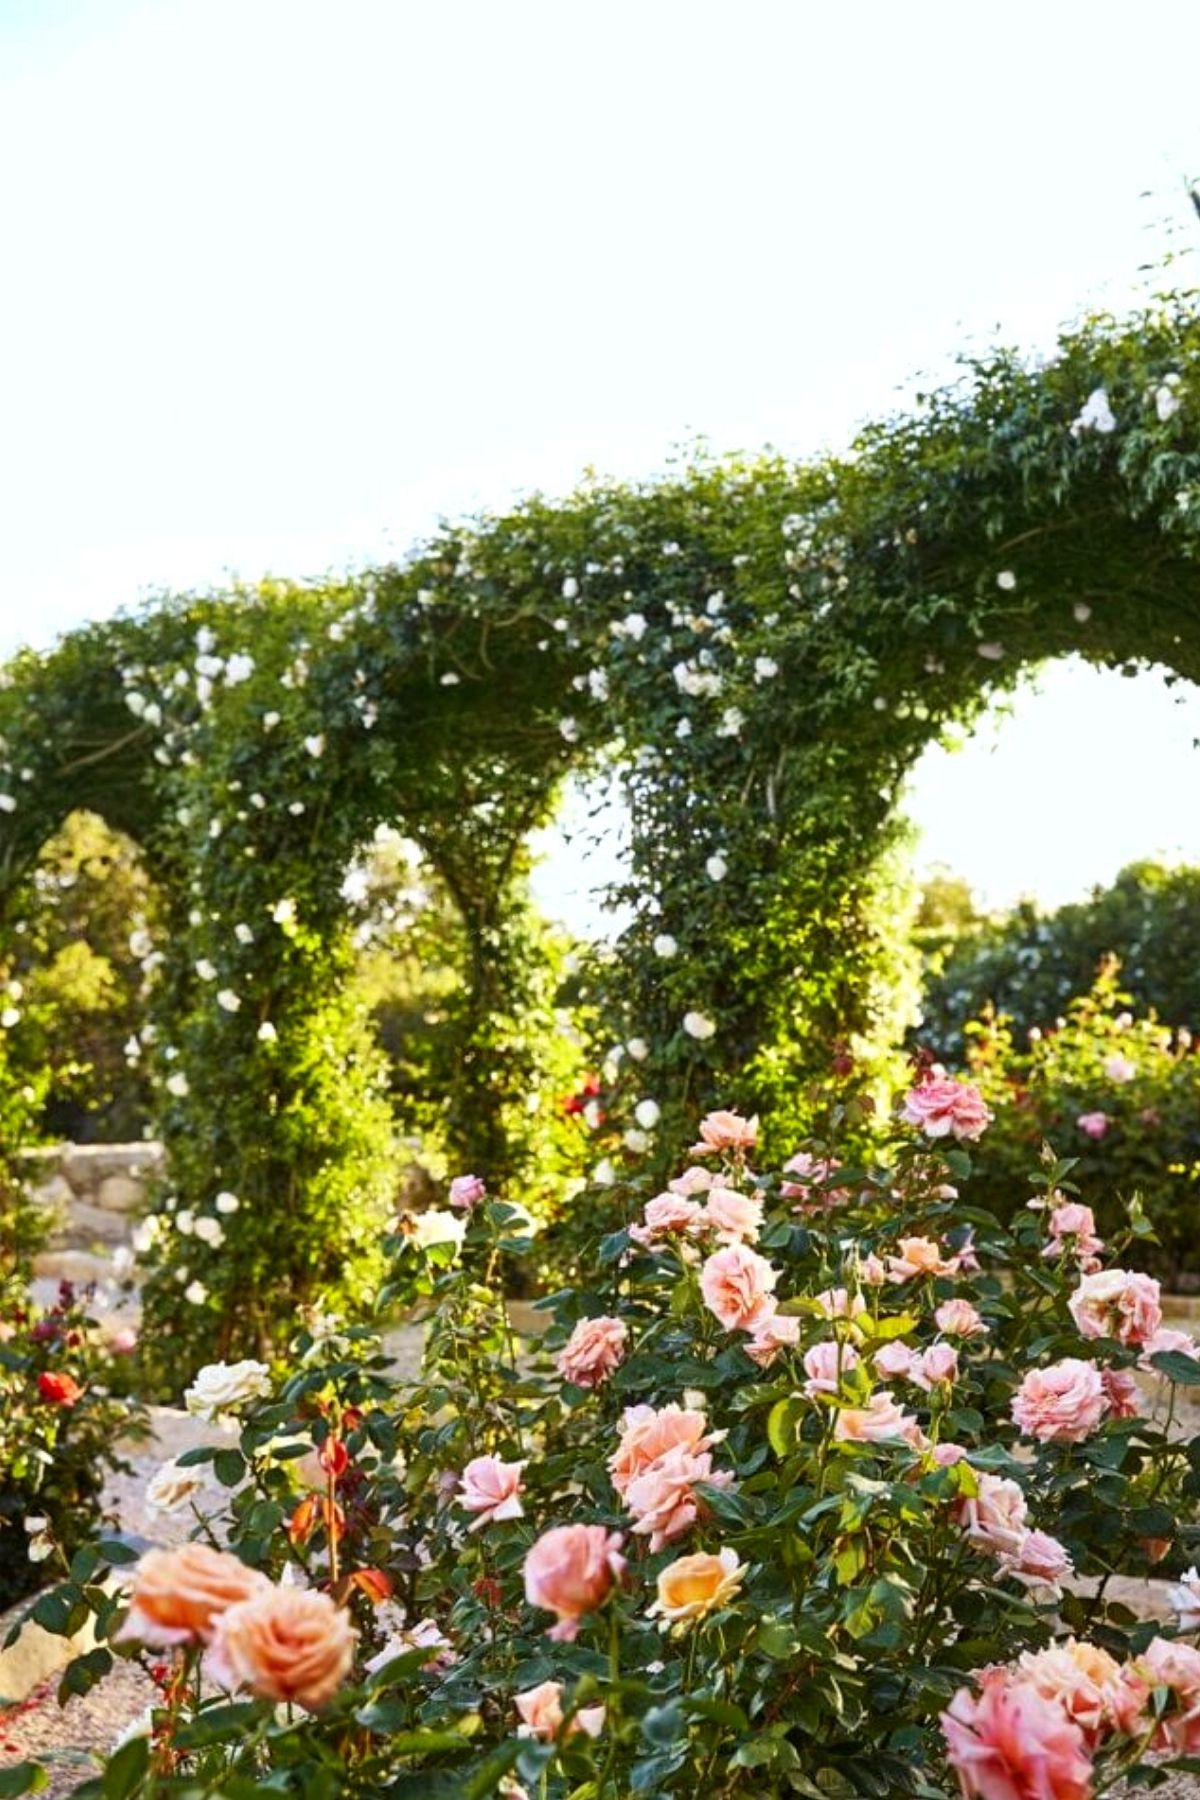 Oprah’s Rose Garden Was The Perfect Backdrop For Her Interview With Adele - Article on Thursd - Photo Veranda